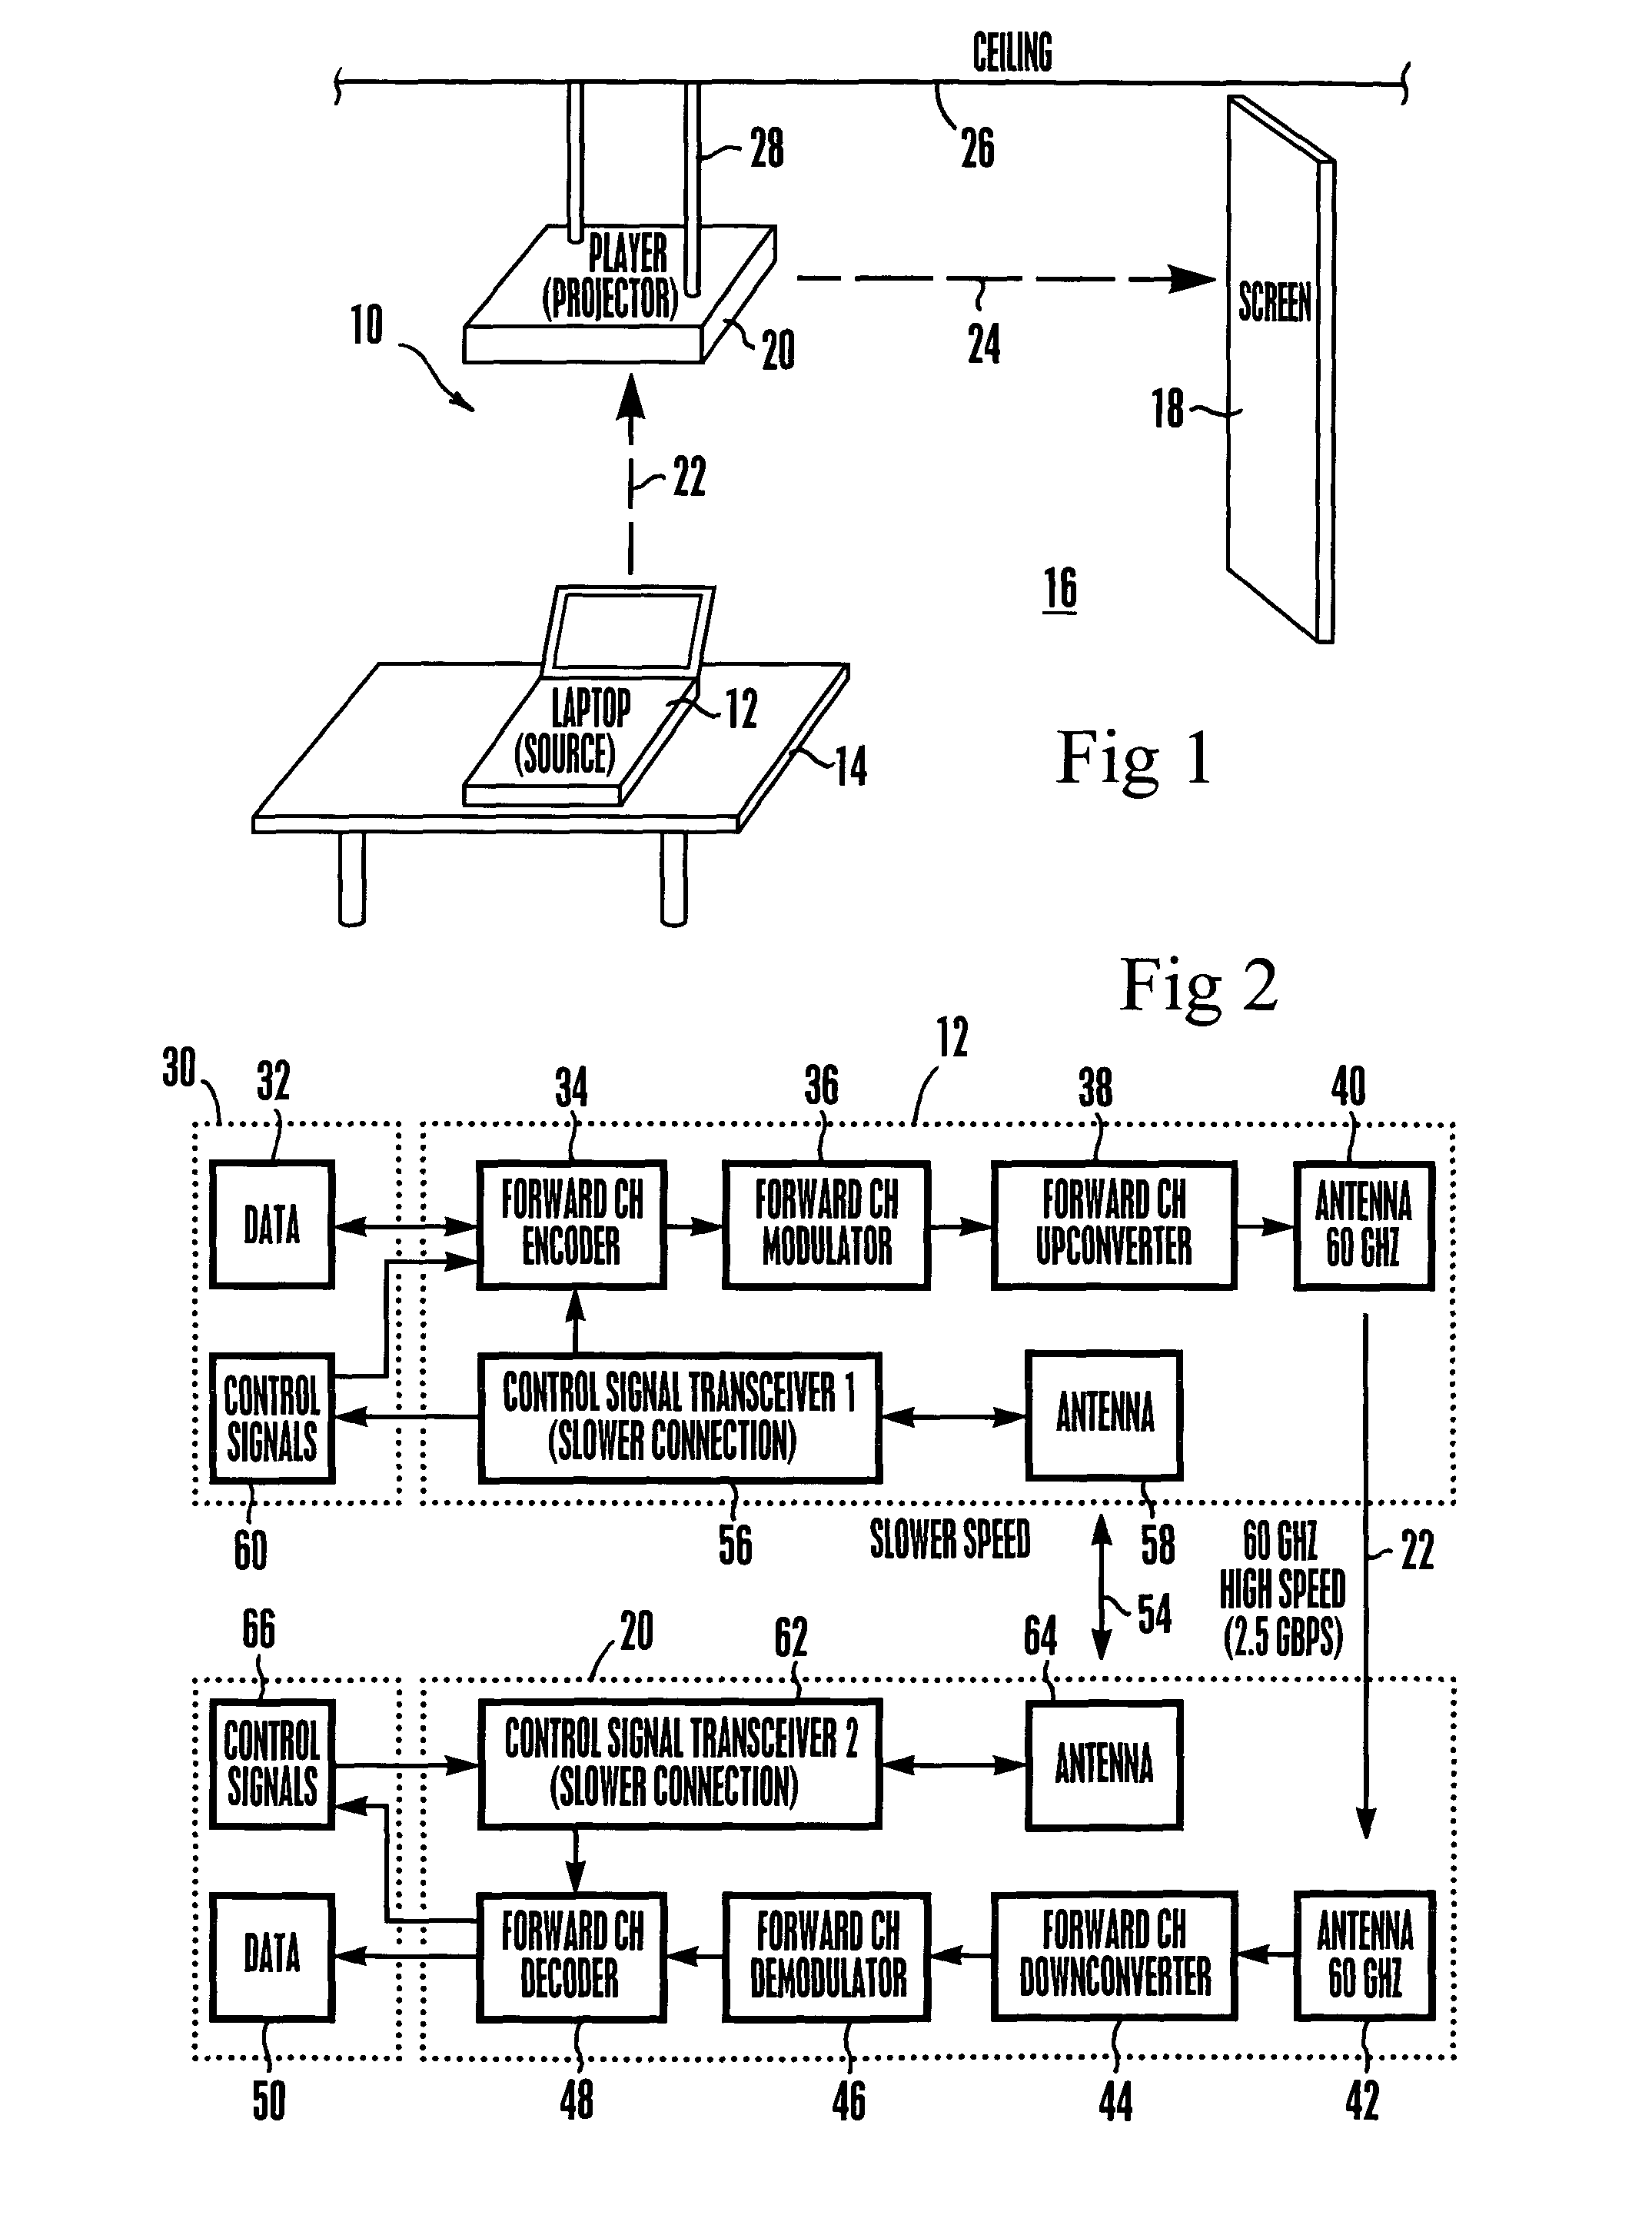 Method and system for wireless digital video presentation